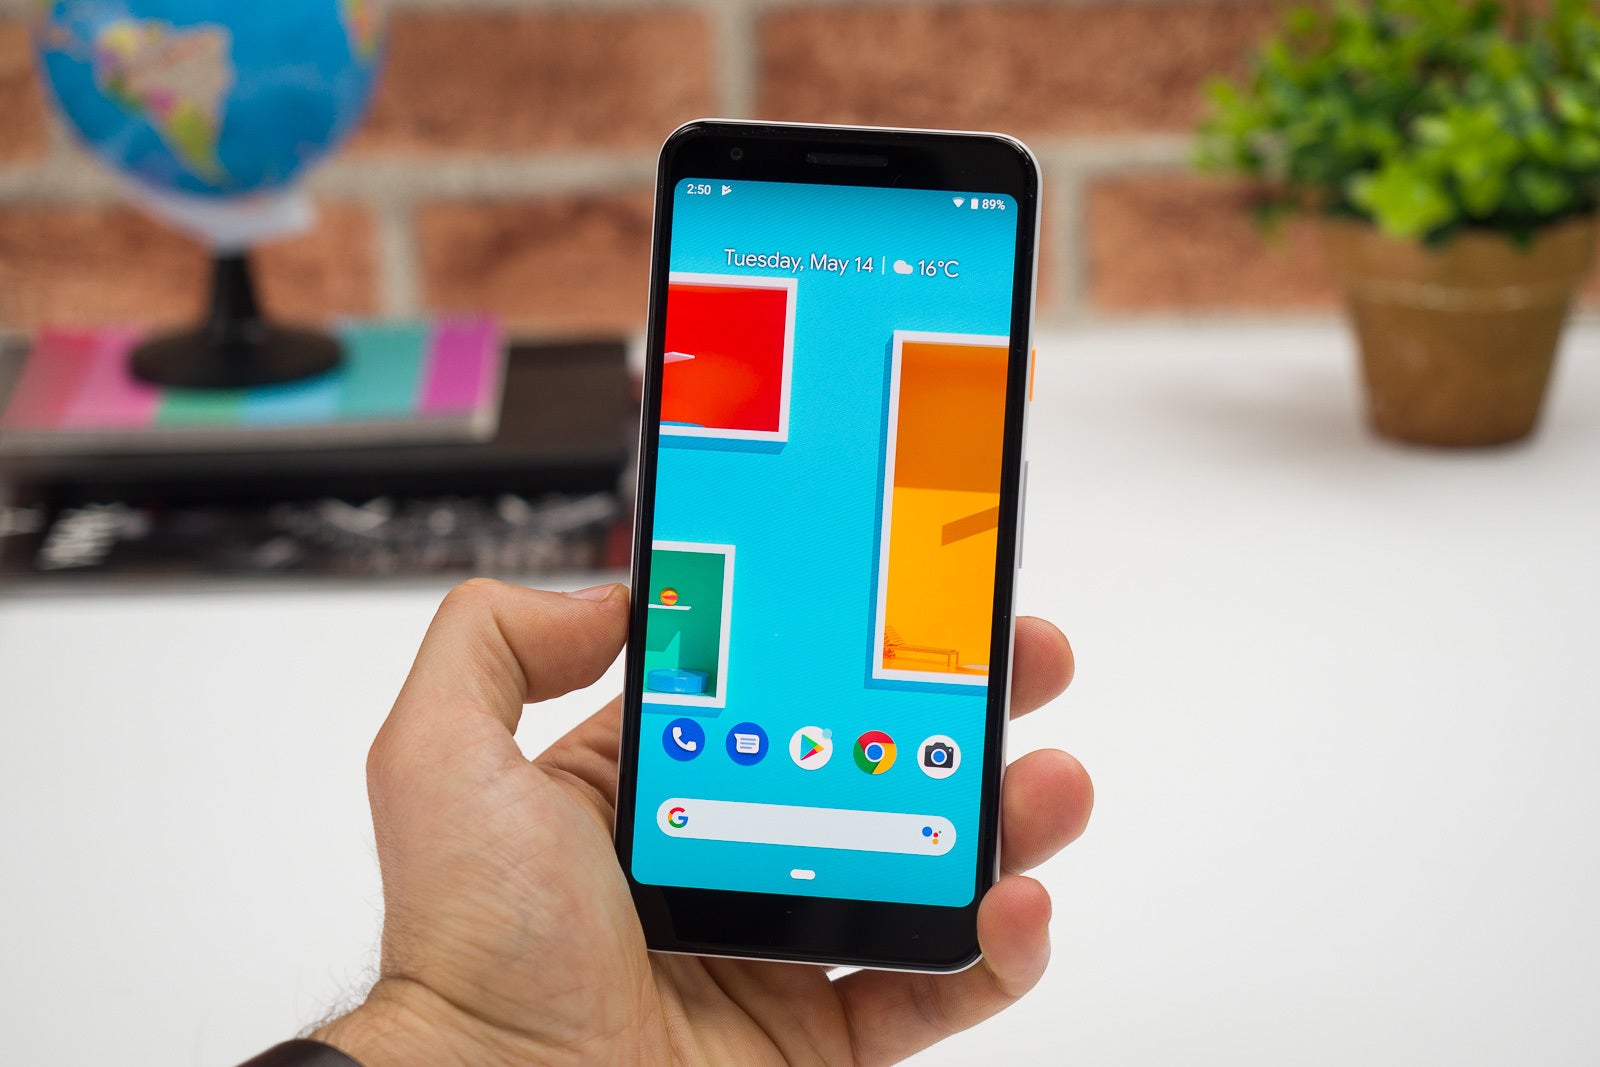 Google's Pixel 3a is the best-selling unlocked smartphone on Amazon